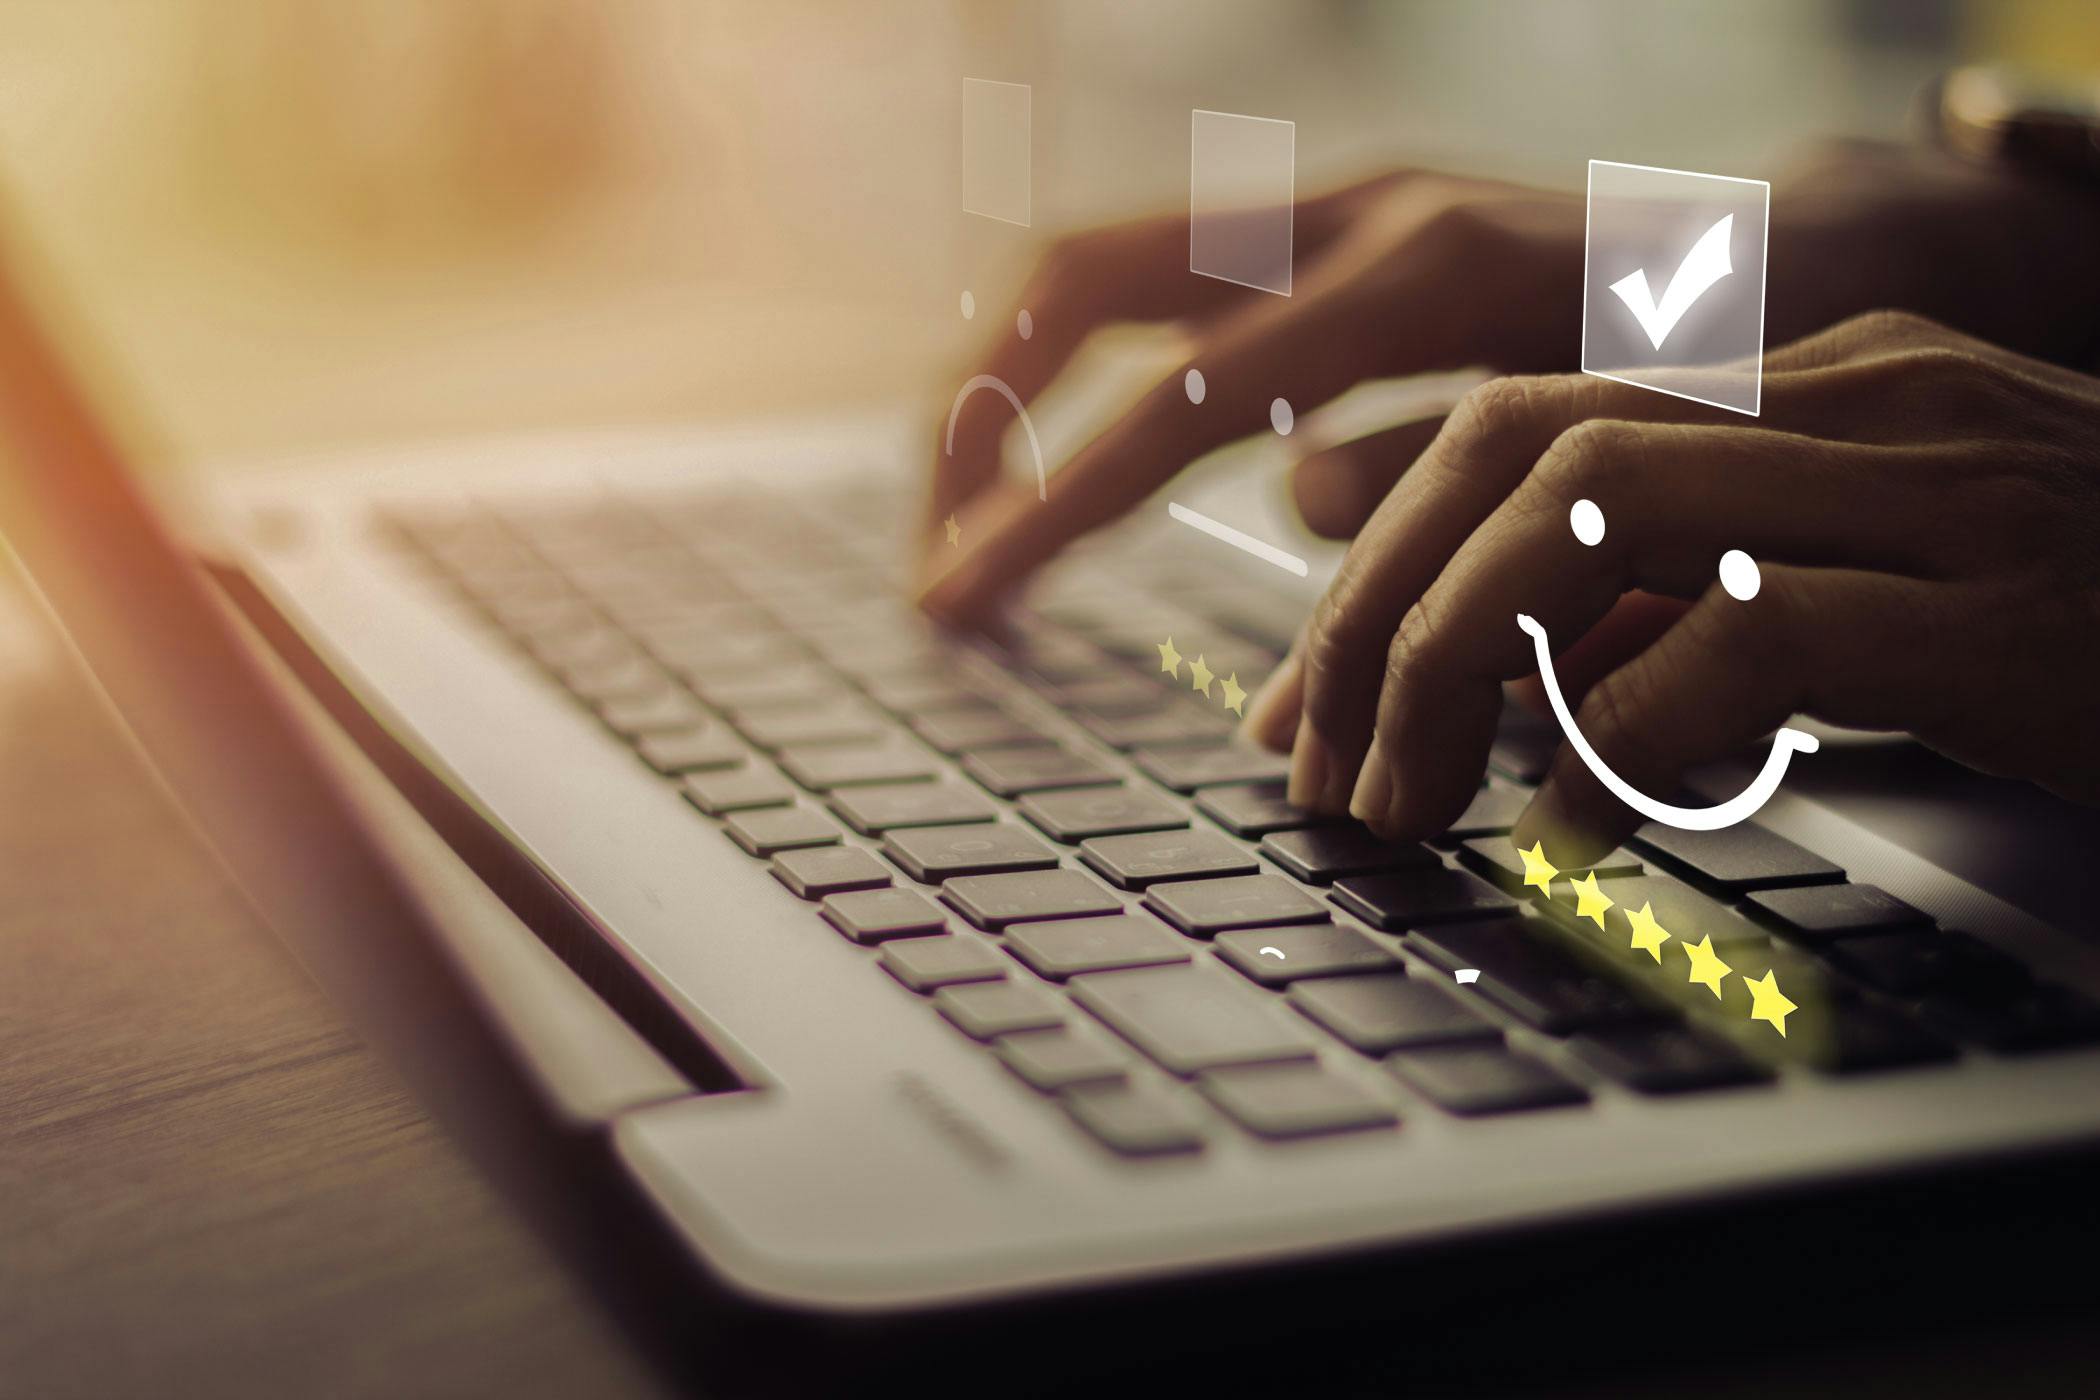 Close-up of person typing on a laptop and selecting a smiley face icon with five stars.